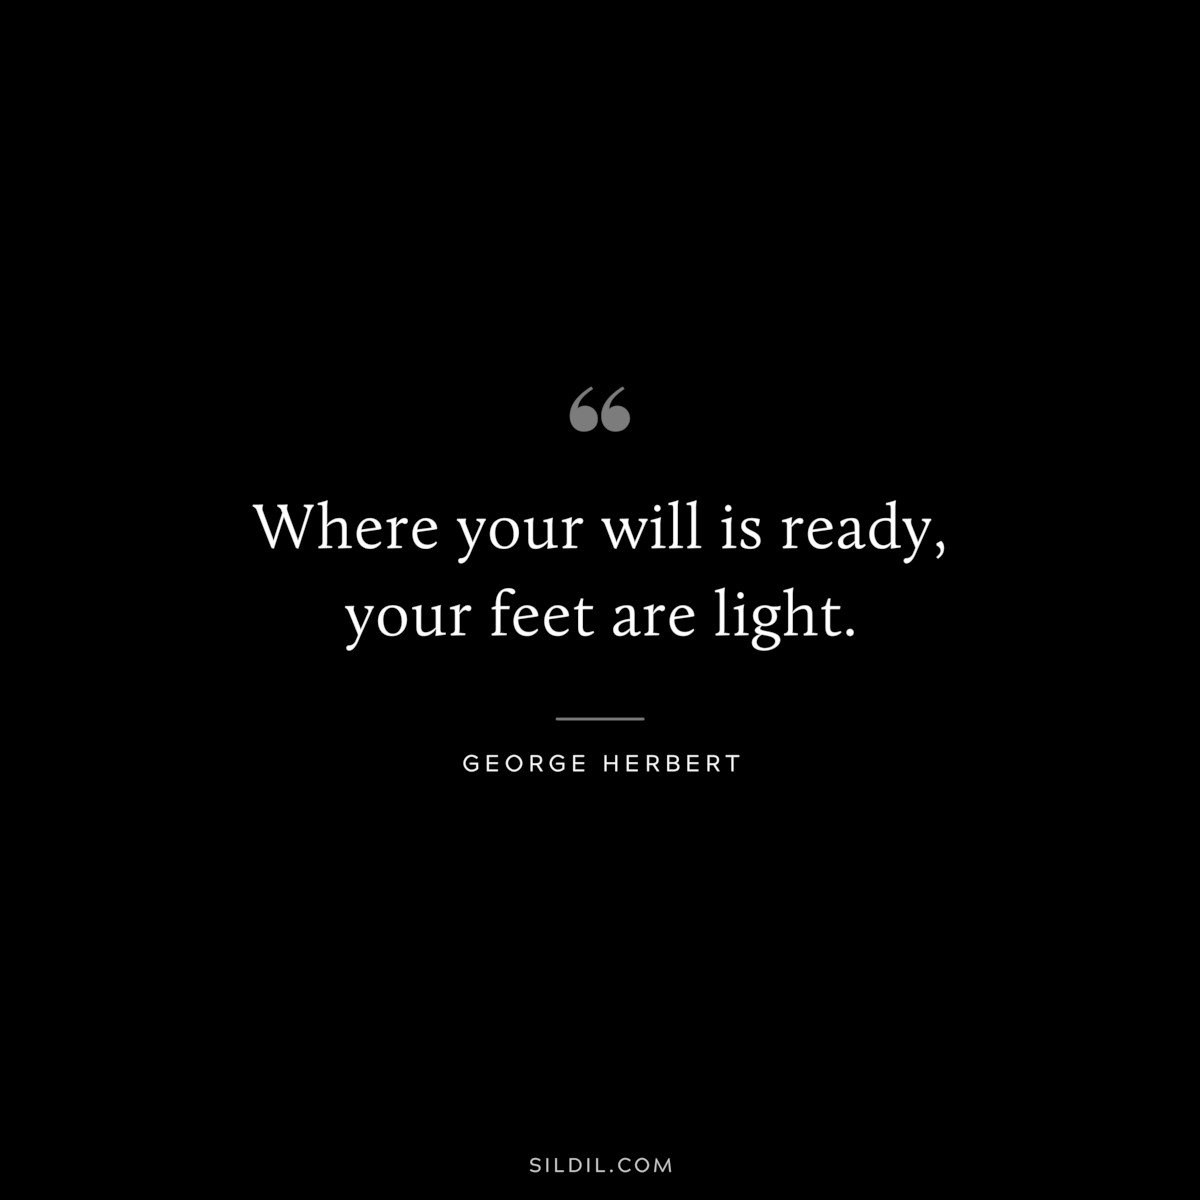 Where your will is ready, your feet are light. ― George Herbert